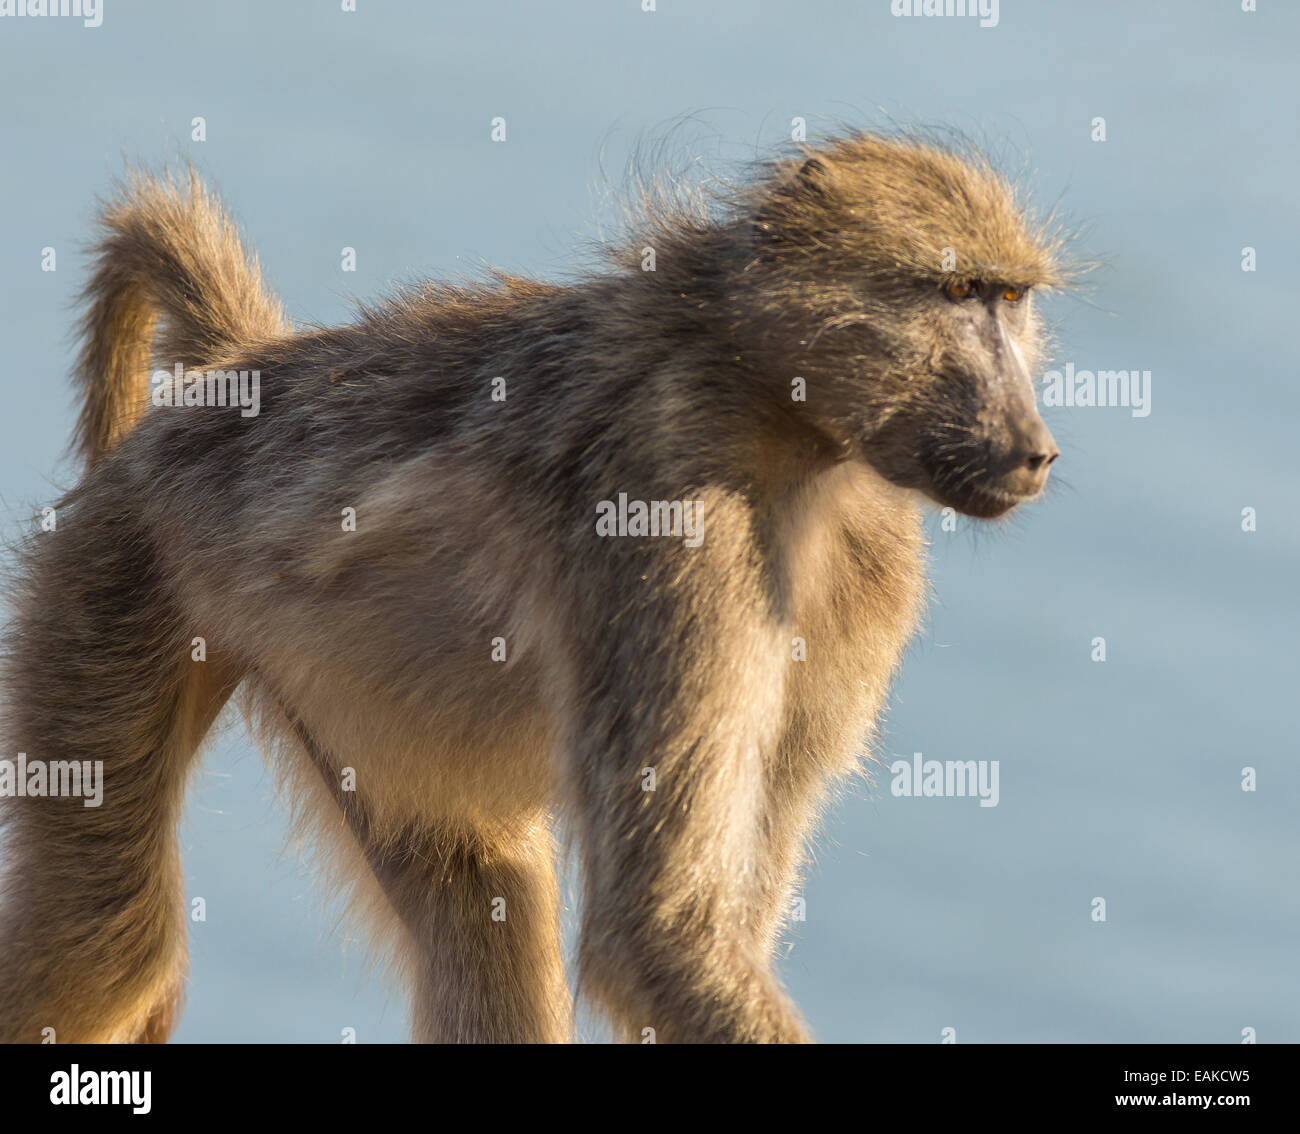 KRUGER NATIONAL PARK, SOUTH AFRICA - Baboon Stock Photo